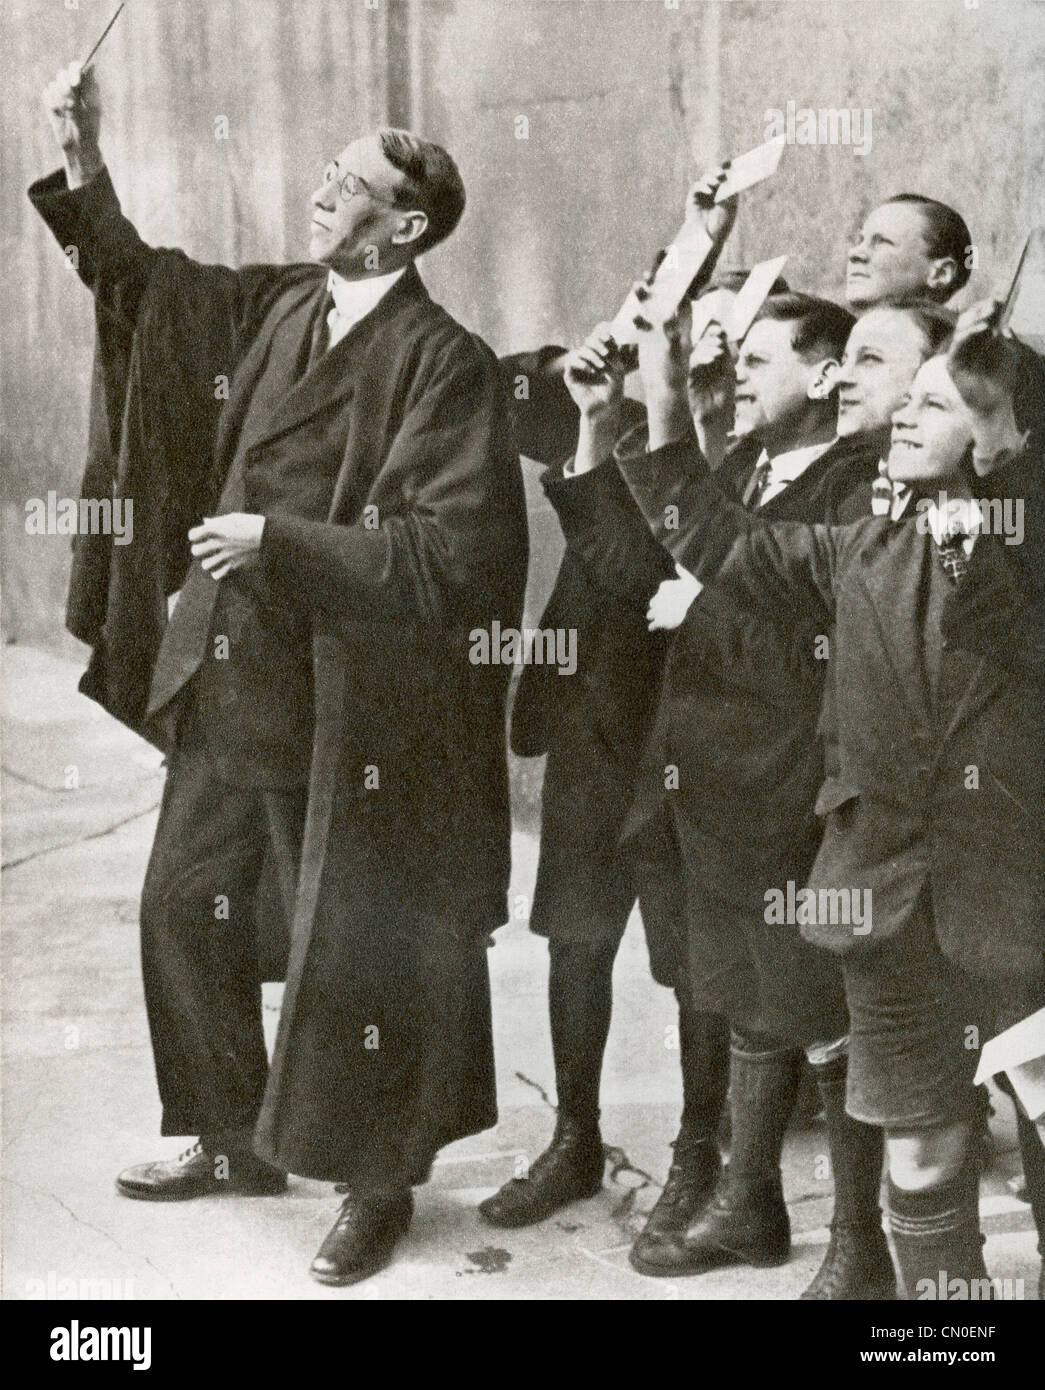 A teacher and his pupils using smoked glass to observe the eclipse of the sun in 1921. Stock Photo